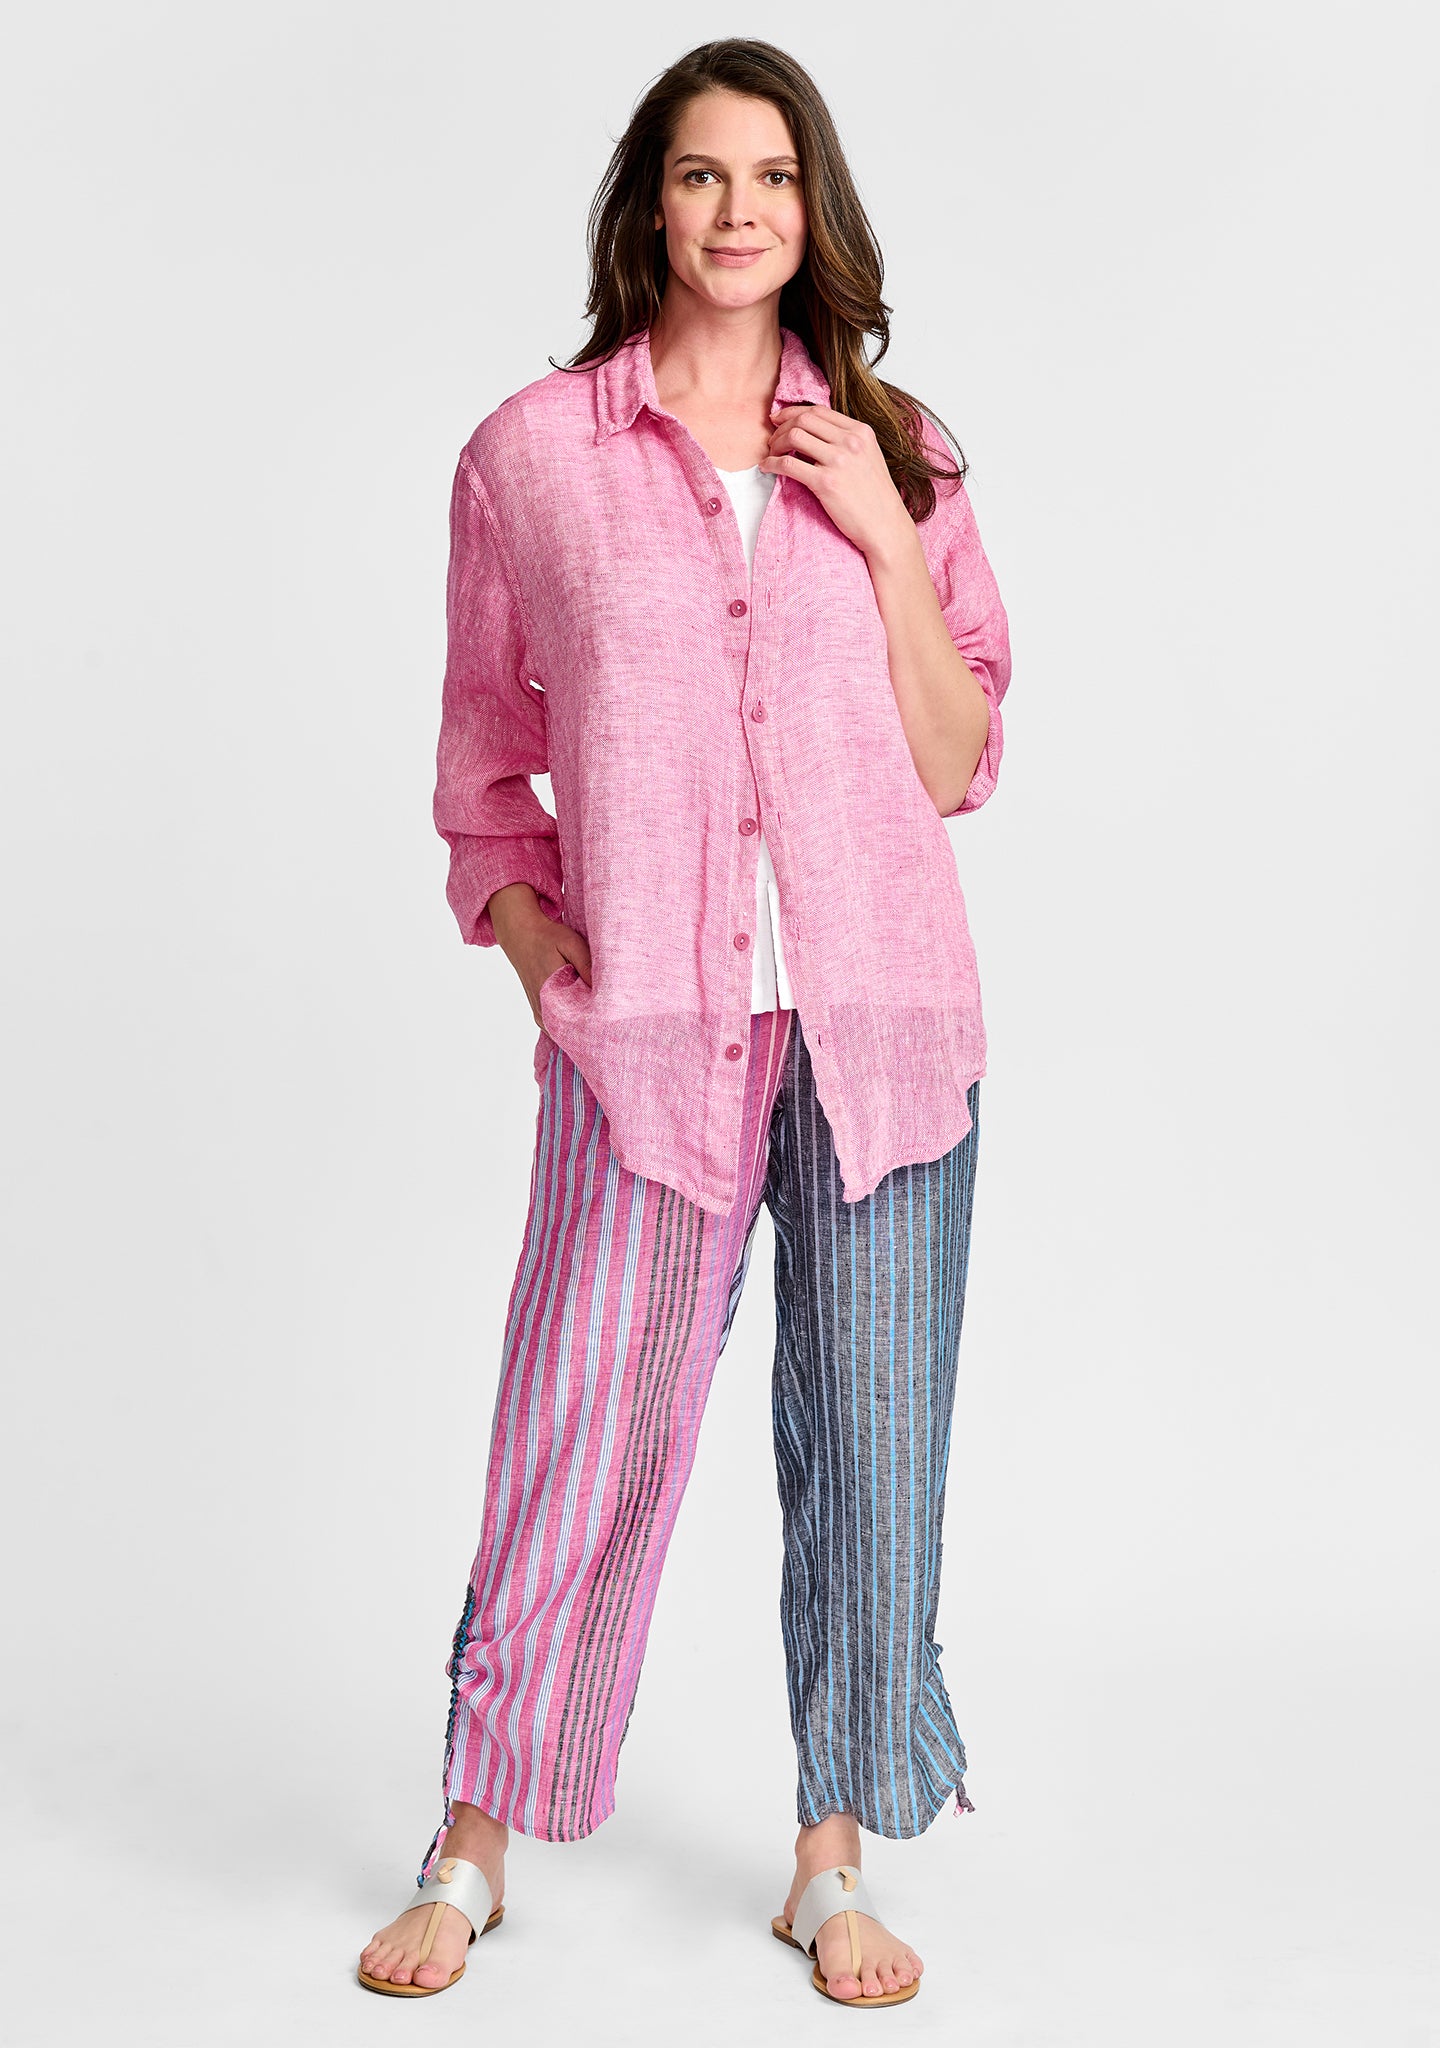 FLAX linen shirt in pink with linen tank in white and linen pants in stripe